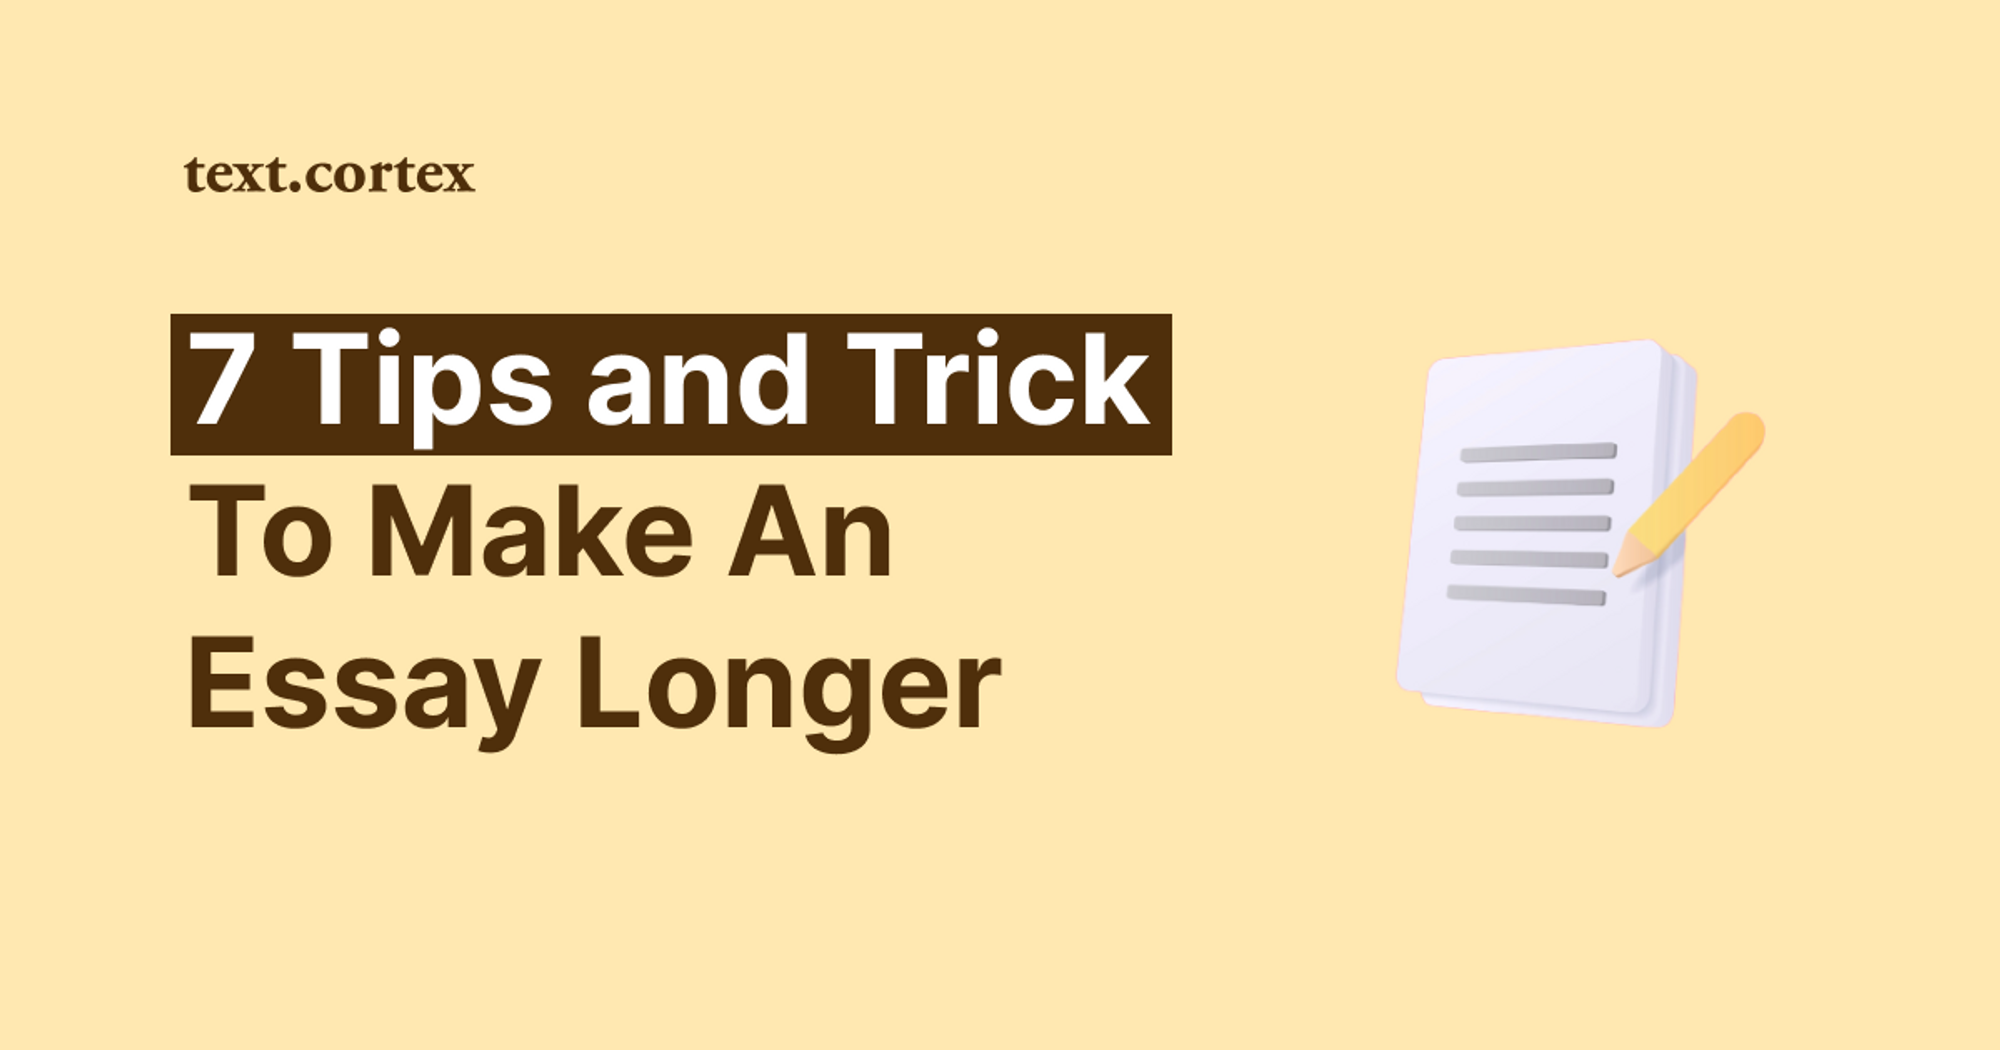 7 Tips and Tricks To Make An Essay Longer